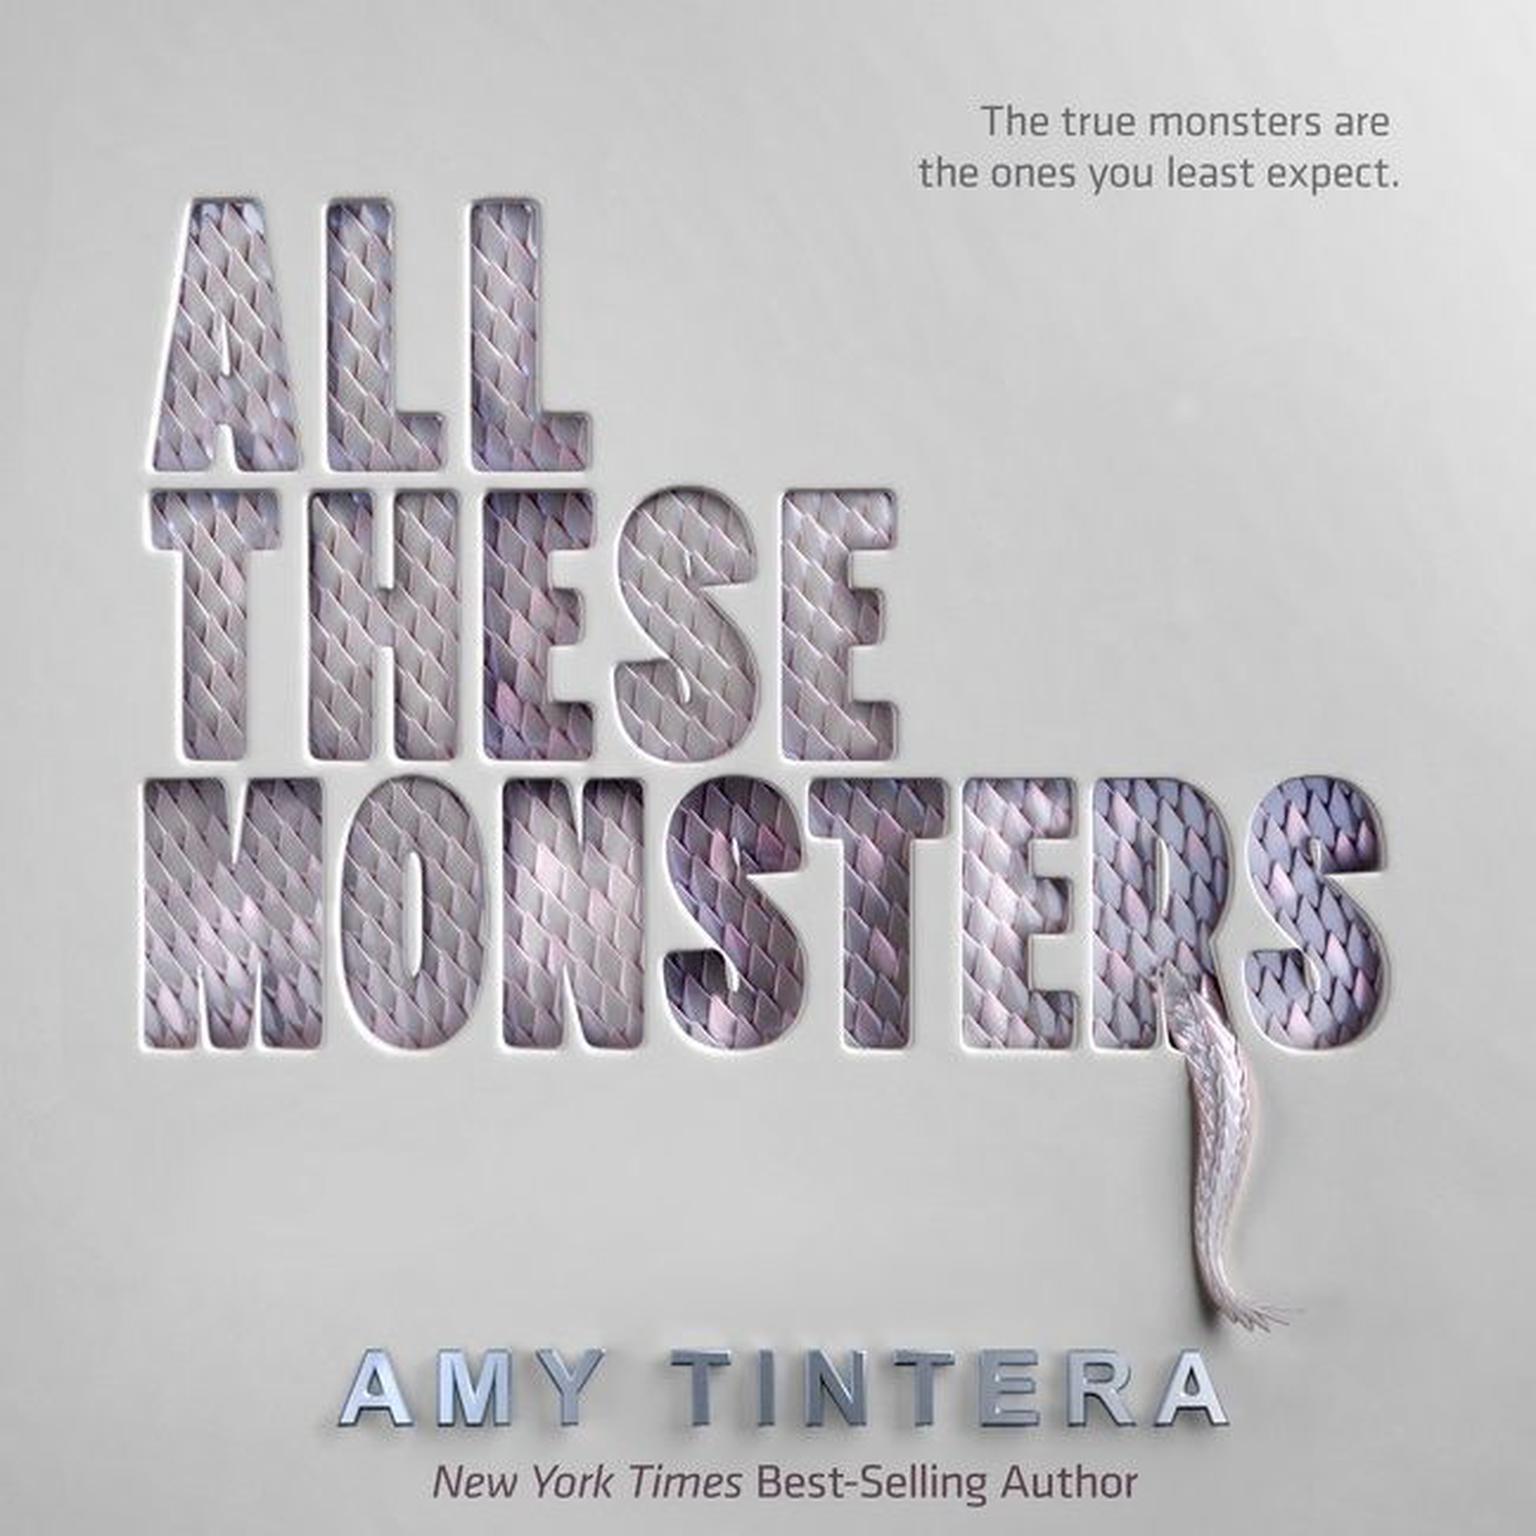 All These Monsters Audiobook, by Amy Tintera